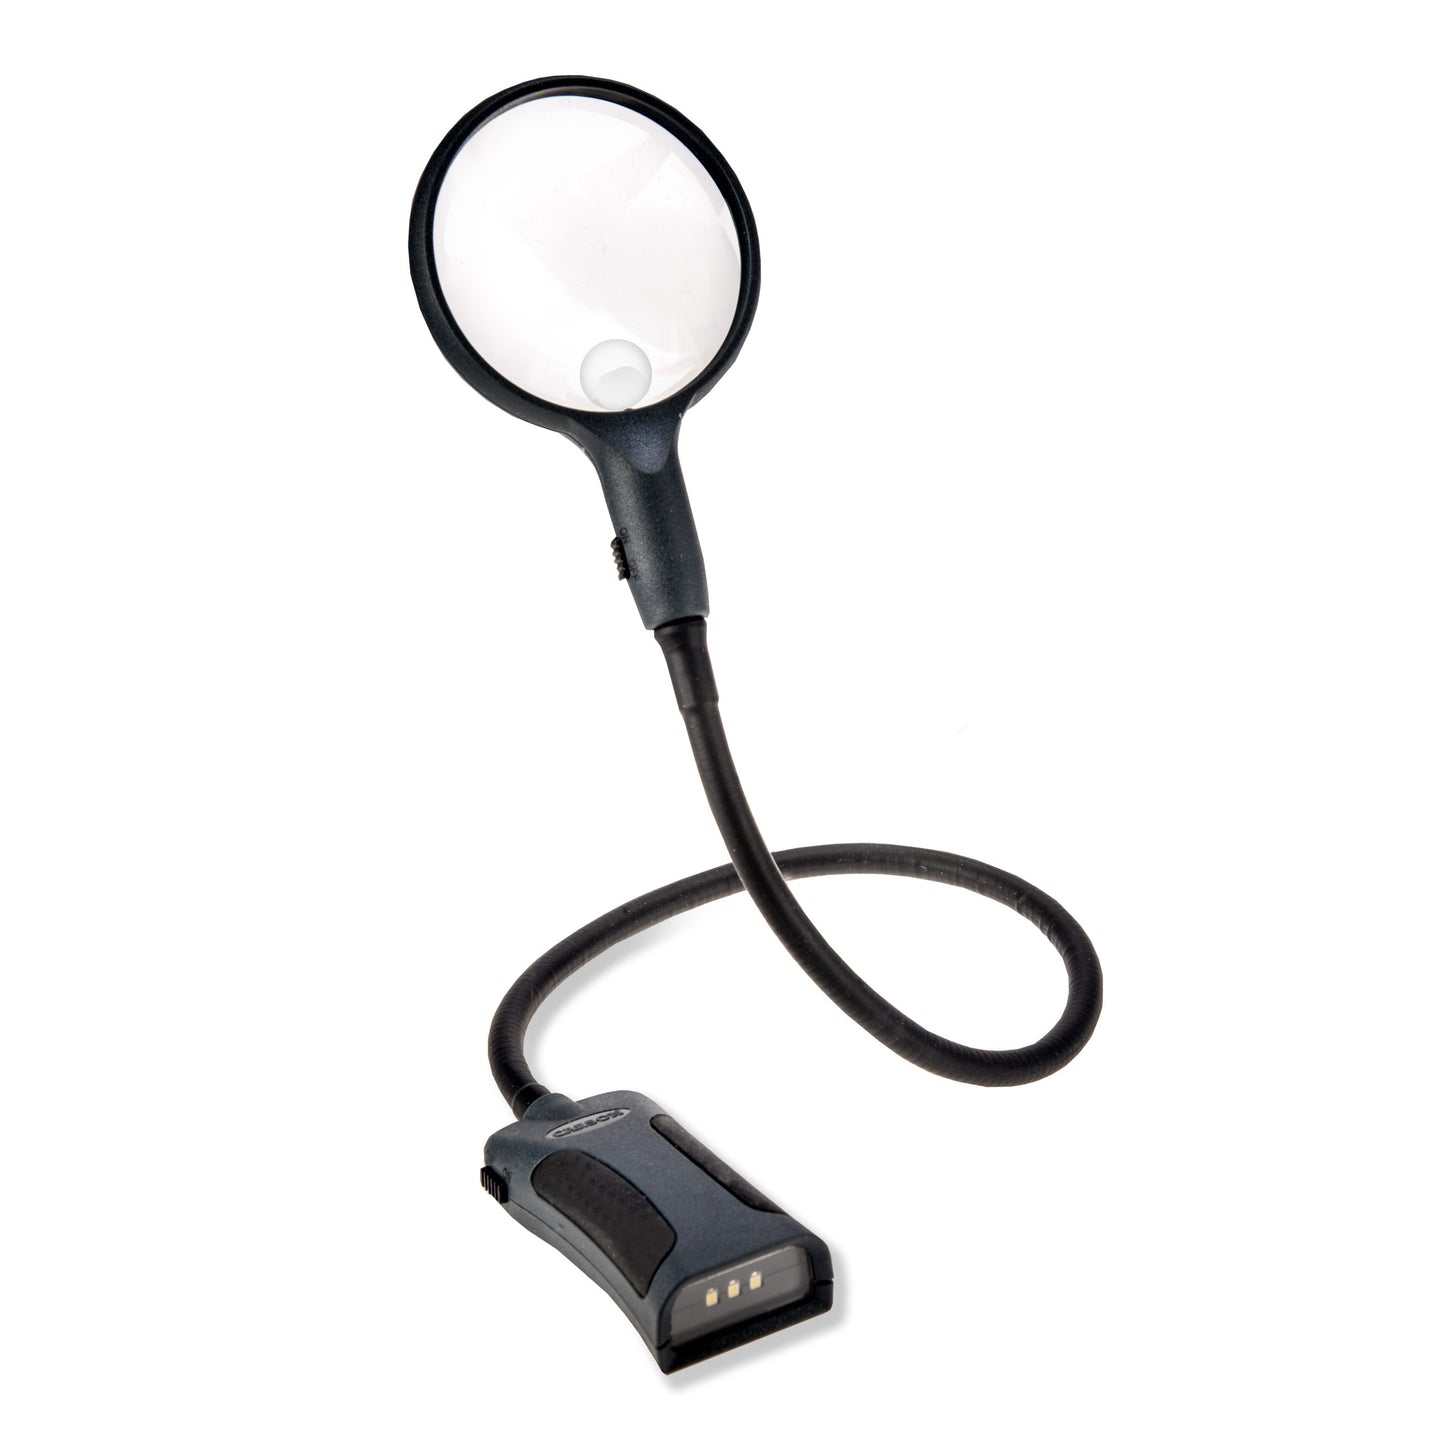 Carson BoaMag™ 2.5x Power 90mm LED Lighted Flexible Hands-Free / Neck Magnifier with Flashlight SM-22